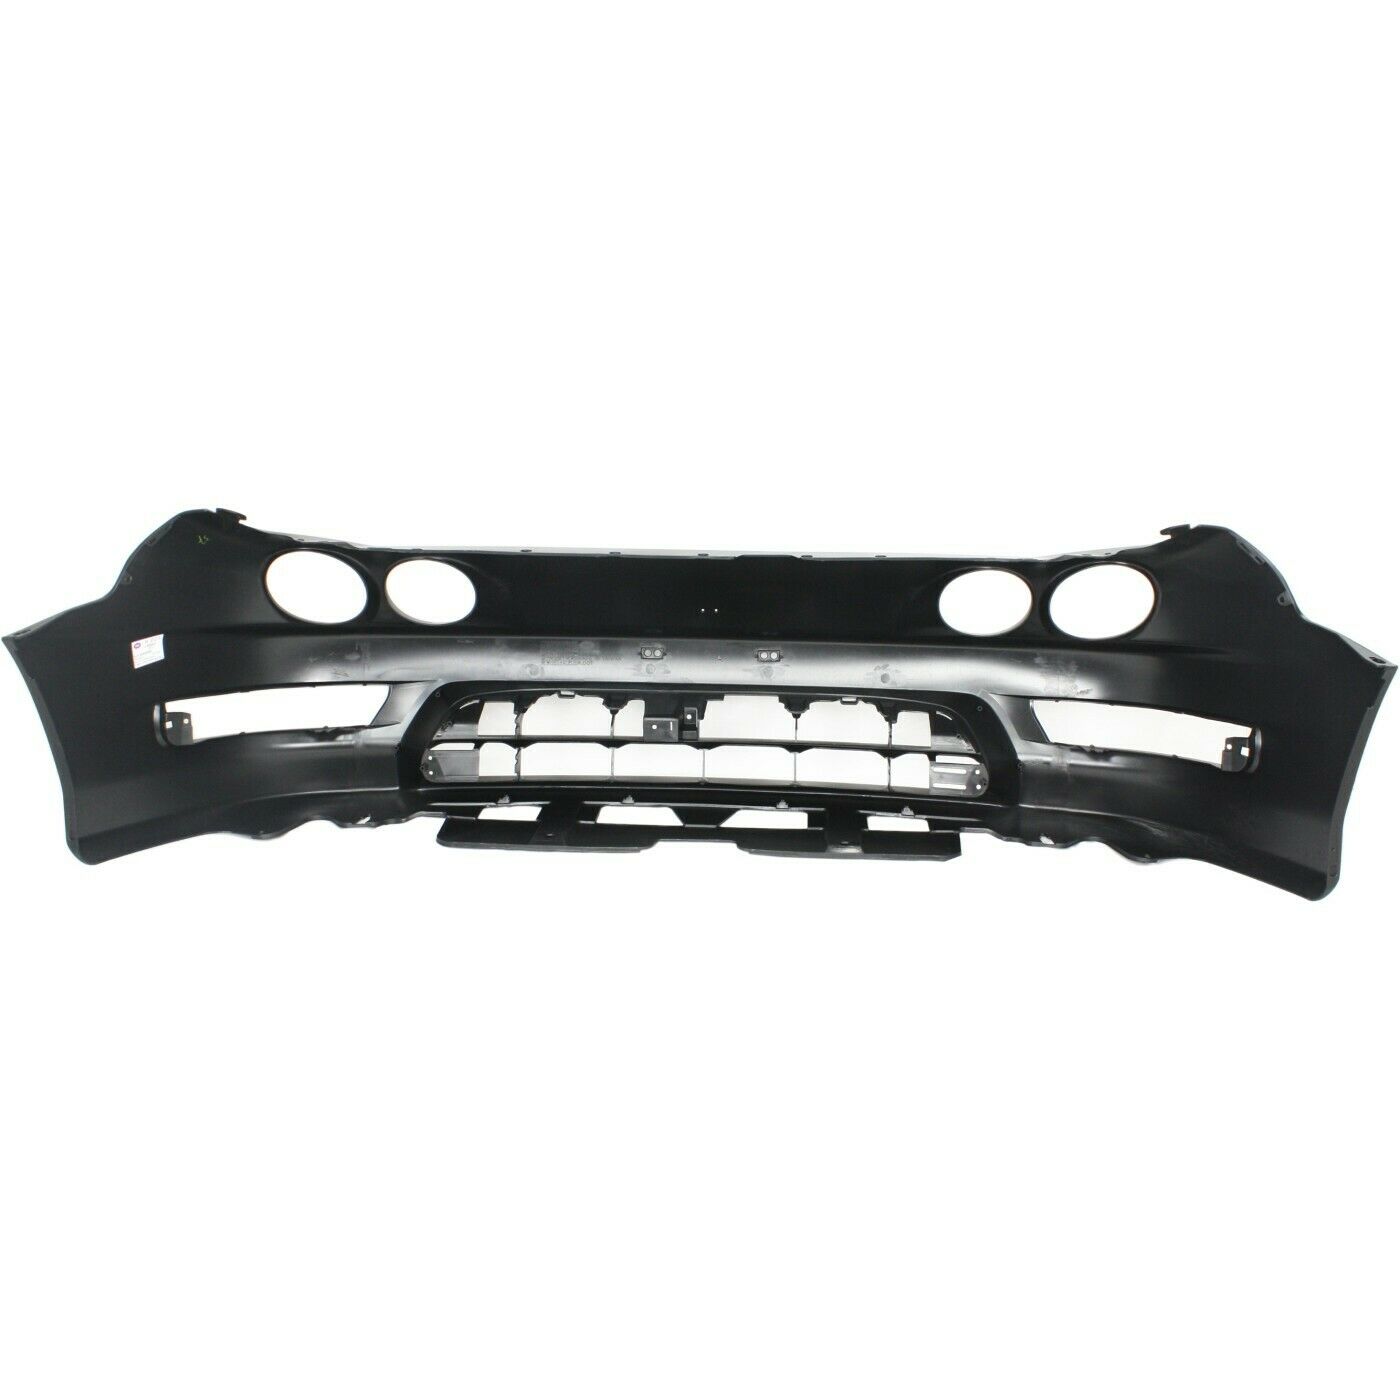 Go-Parts » Compatible 1998-2001 Acura Integra Front Bumper Cover 04711-ST7-A91ZZ AC1000130 Replacement for Acura Integra